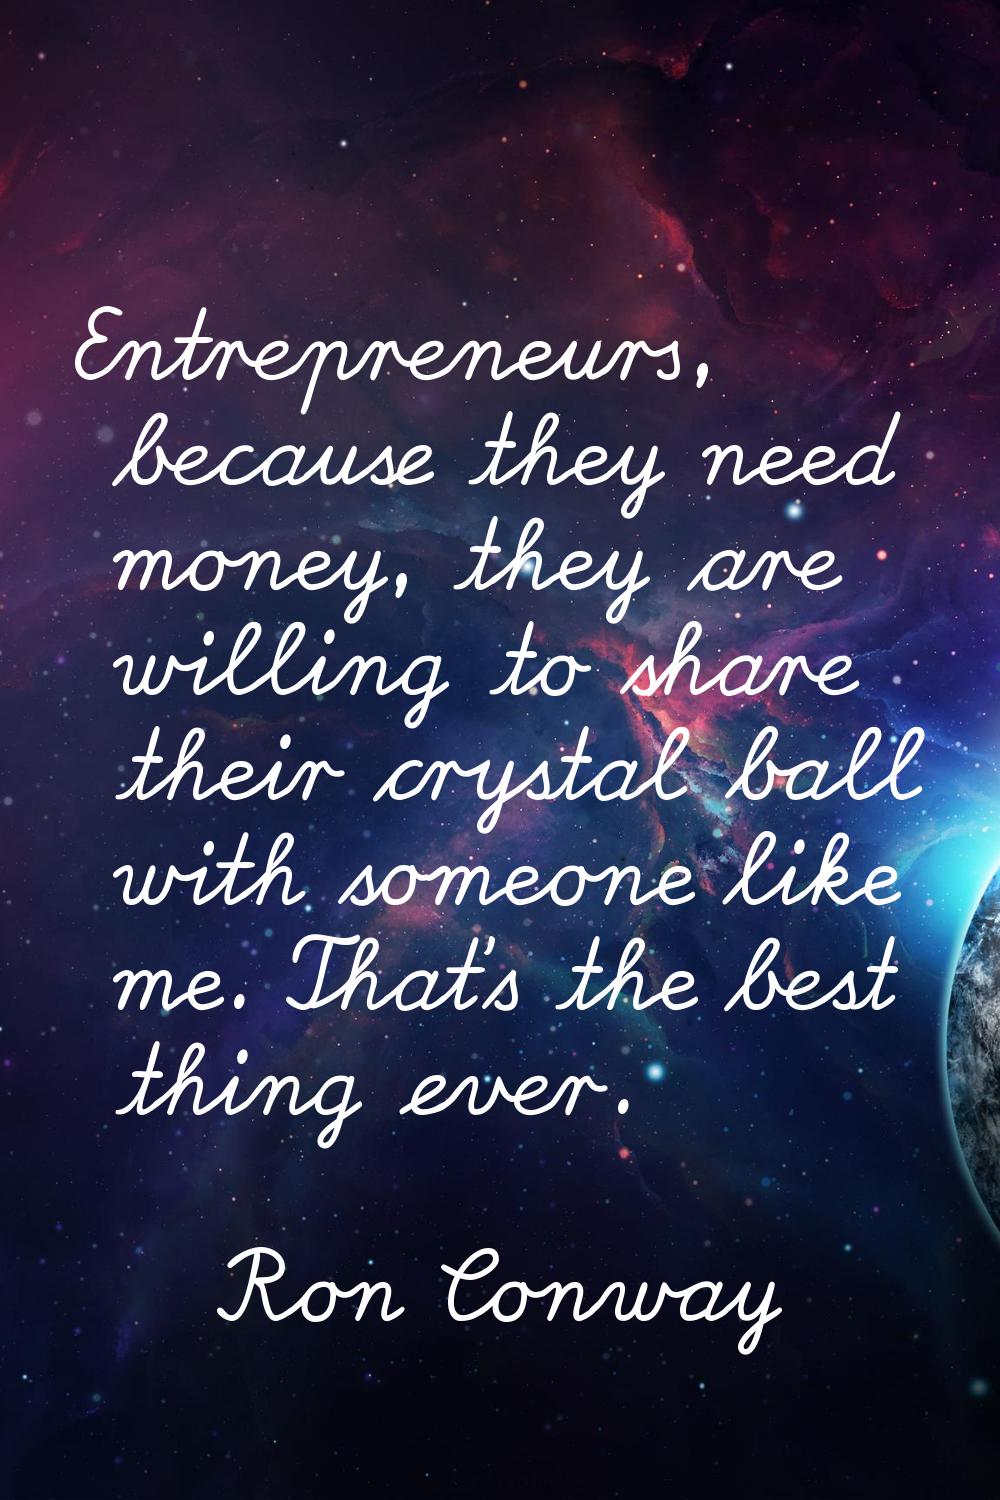 Entrepreneurs, because they need money, they are willing to share their crystal ball with someone l